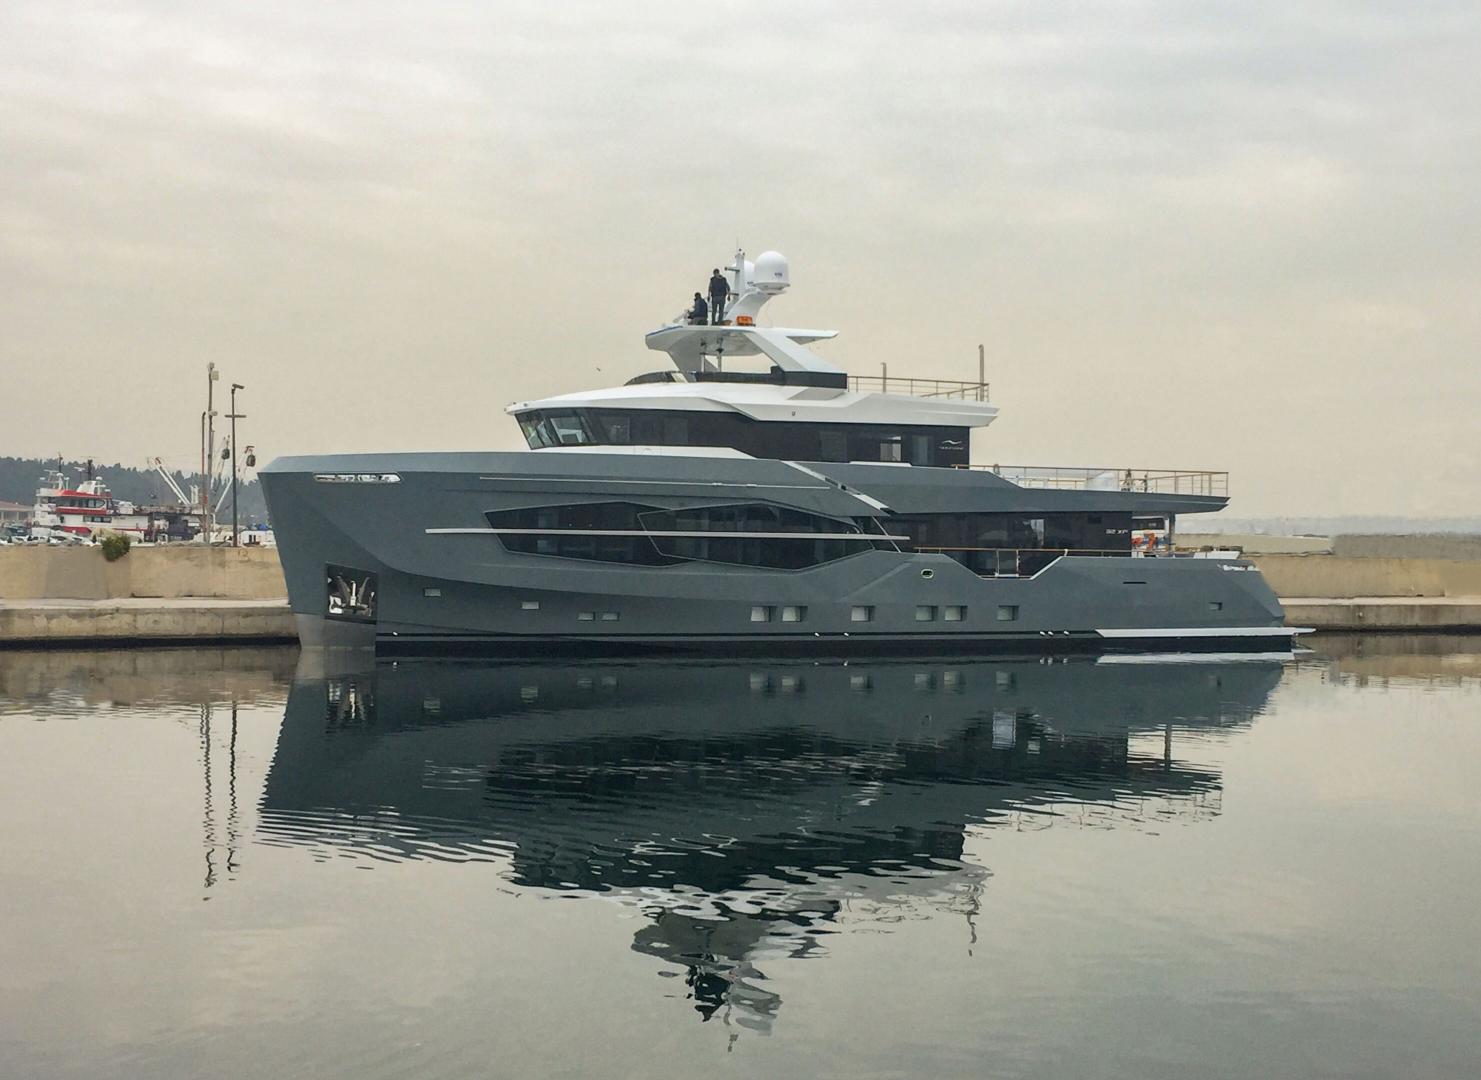 The third superyacht of the 32XP Series of Numarine